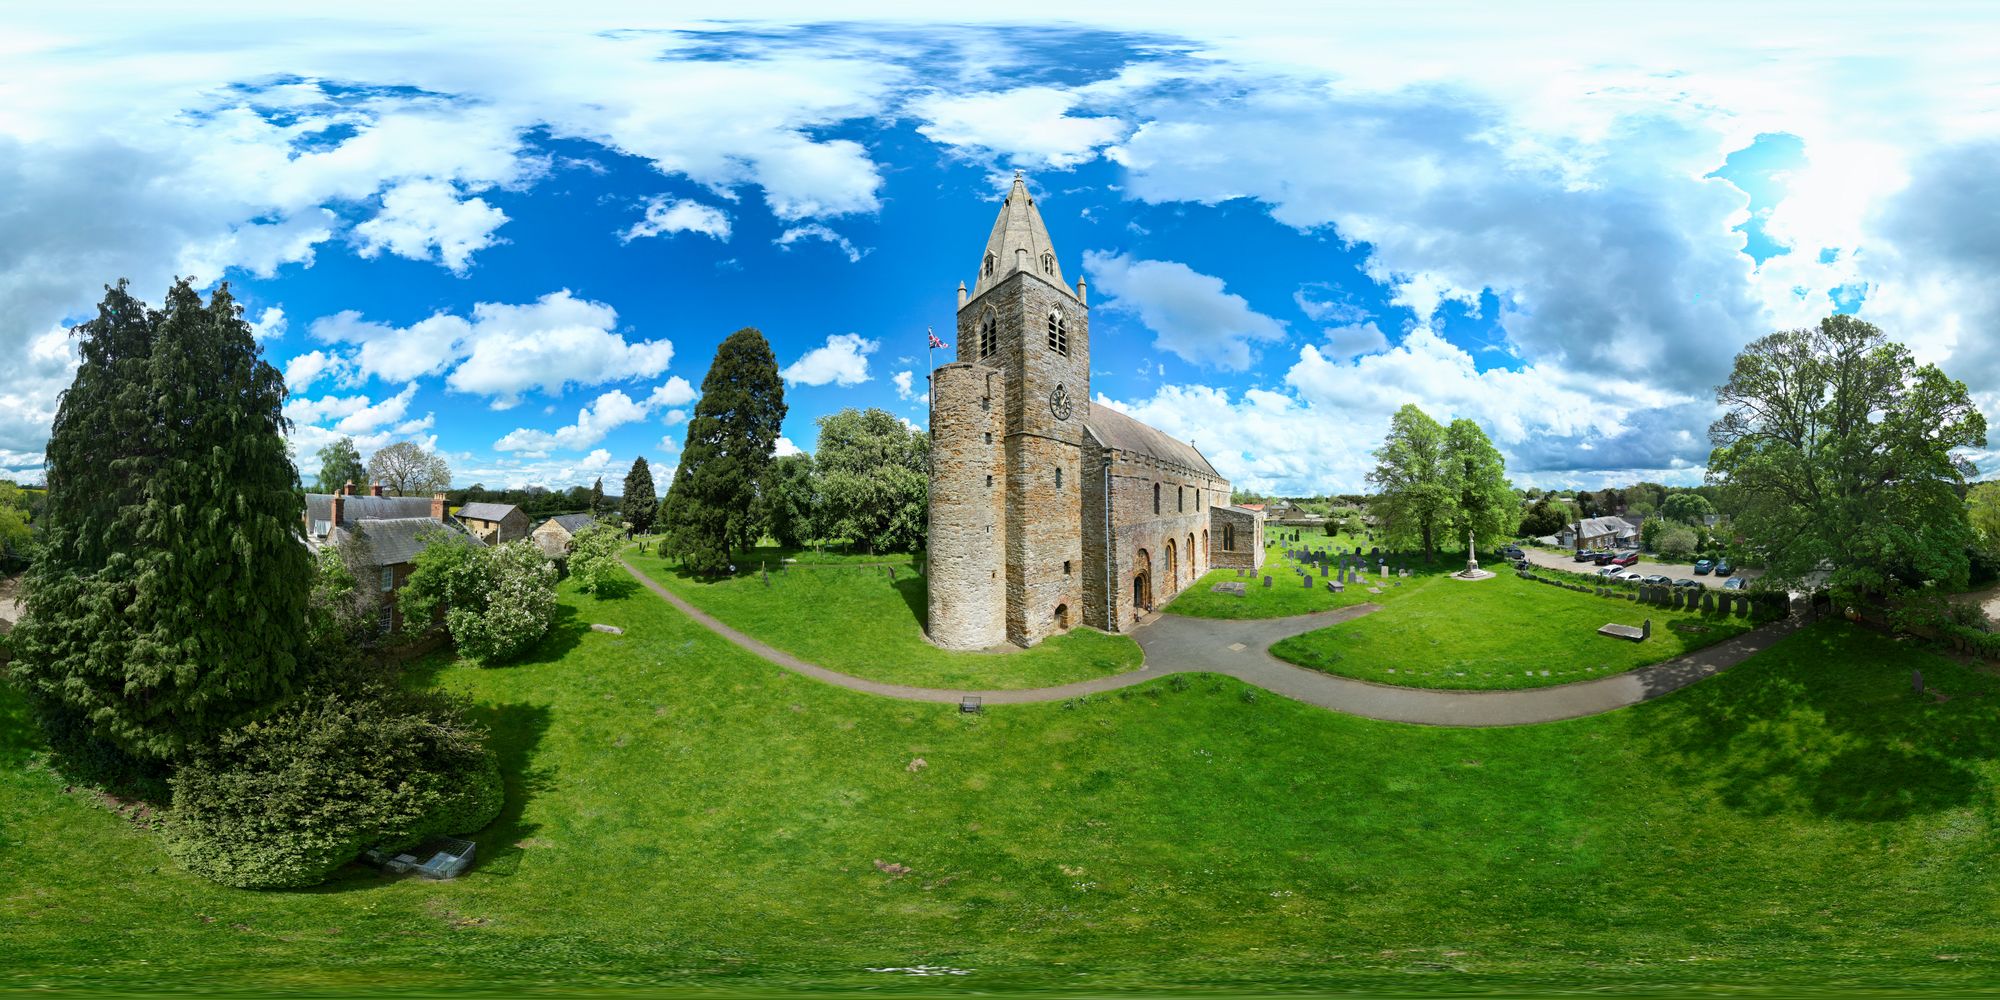 Be there: All Saints, Brixworth in glorious VR